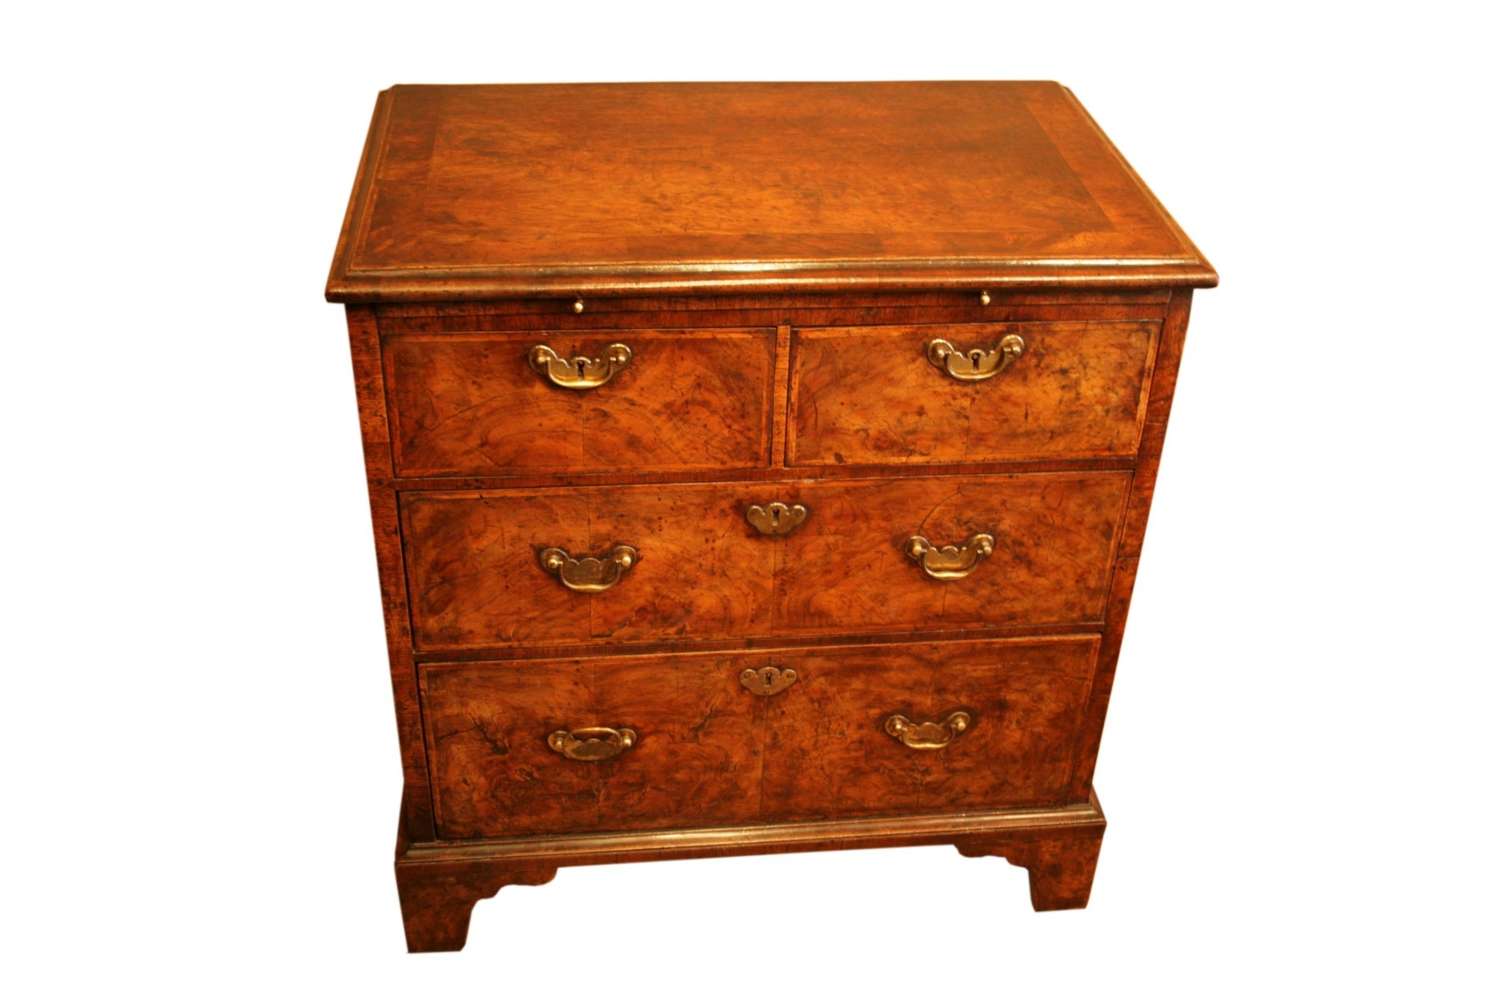 A Rare Small George I Figured Walnut Chest Of Drawers